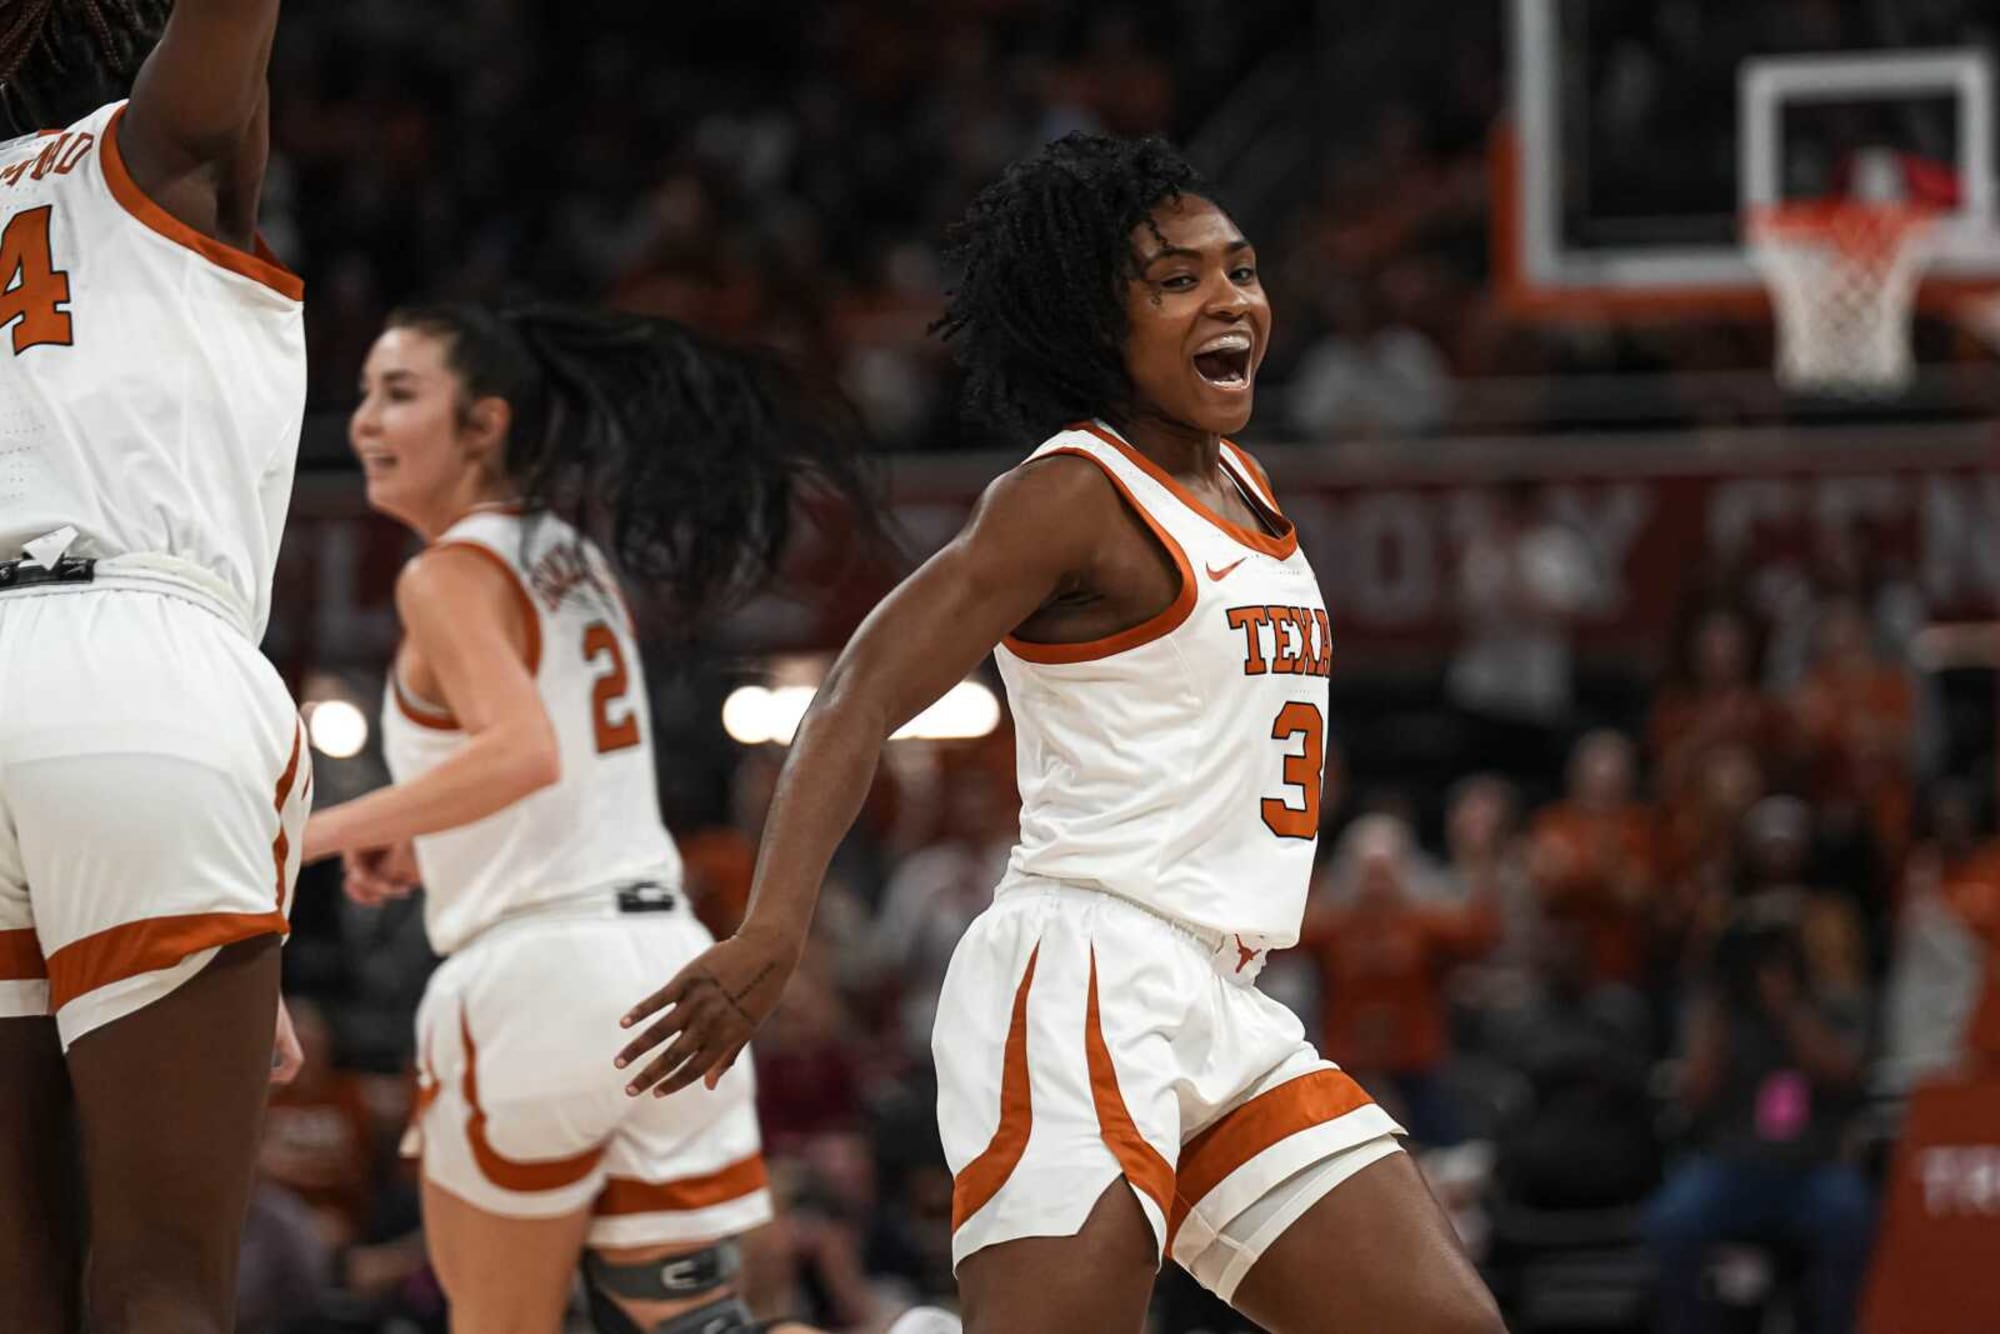 Texas Women’s Basketball Upsets UConn with Stellar Performances by Harmon and Booker